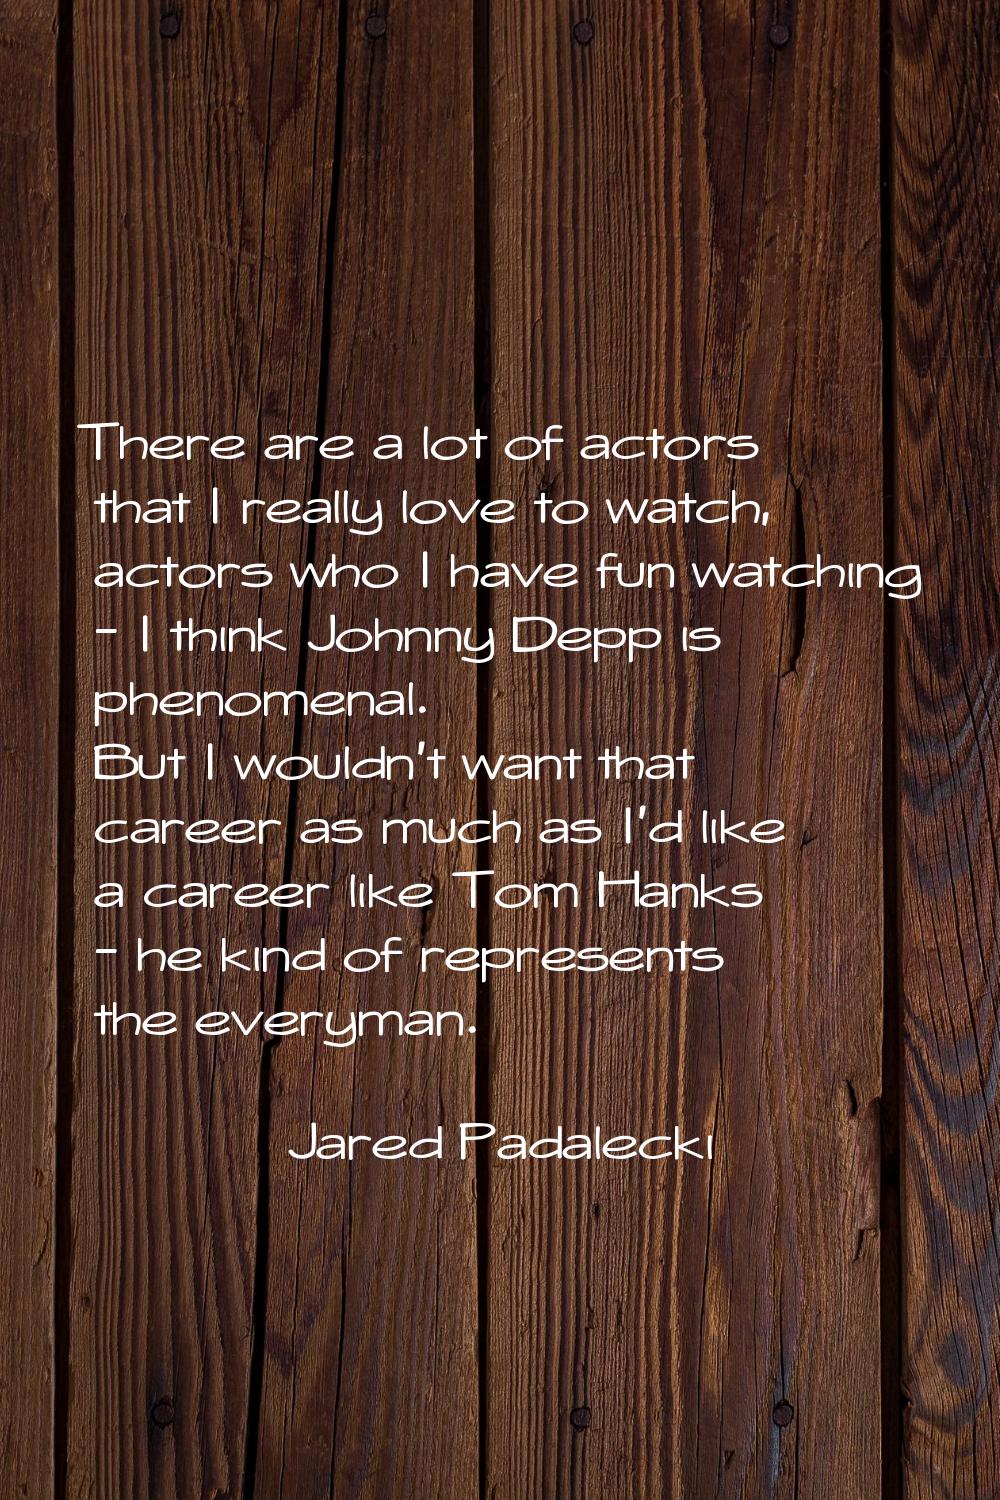 There are a lot of actors that I really love to watch, actors who I have fun watching - I think Joh